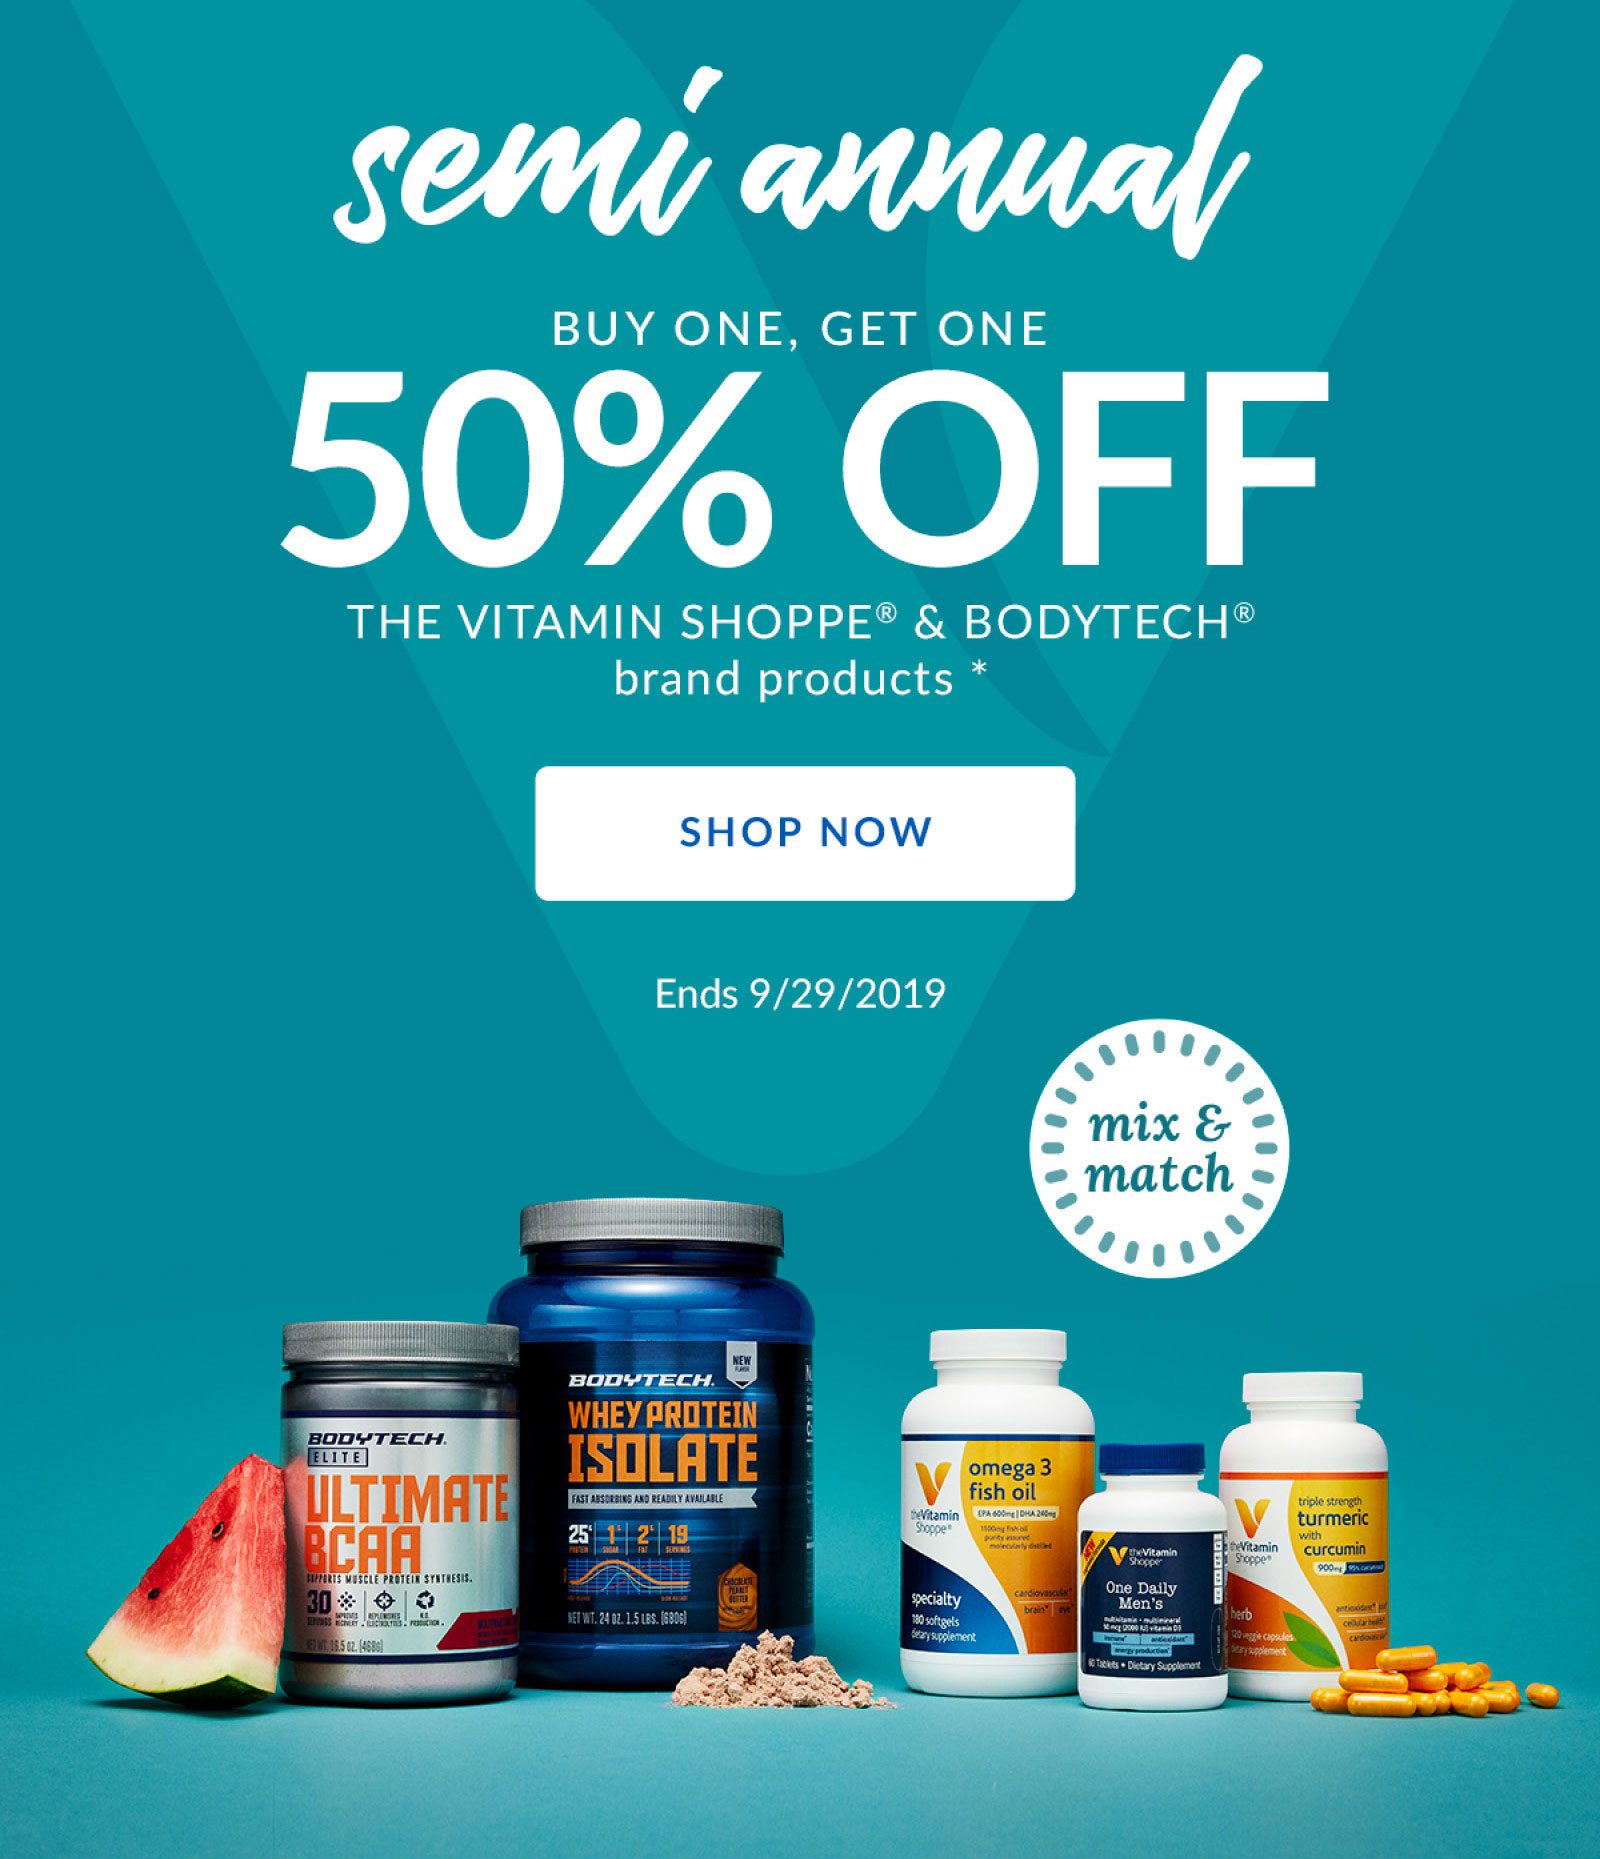 semi annual BUY ONE, GET ONE 50% OFF THE VITAMIN SHOPPE & BODYTECH brand products * | SHOP NOW | Ends 9/29/2019